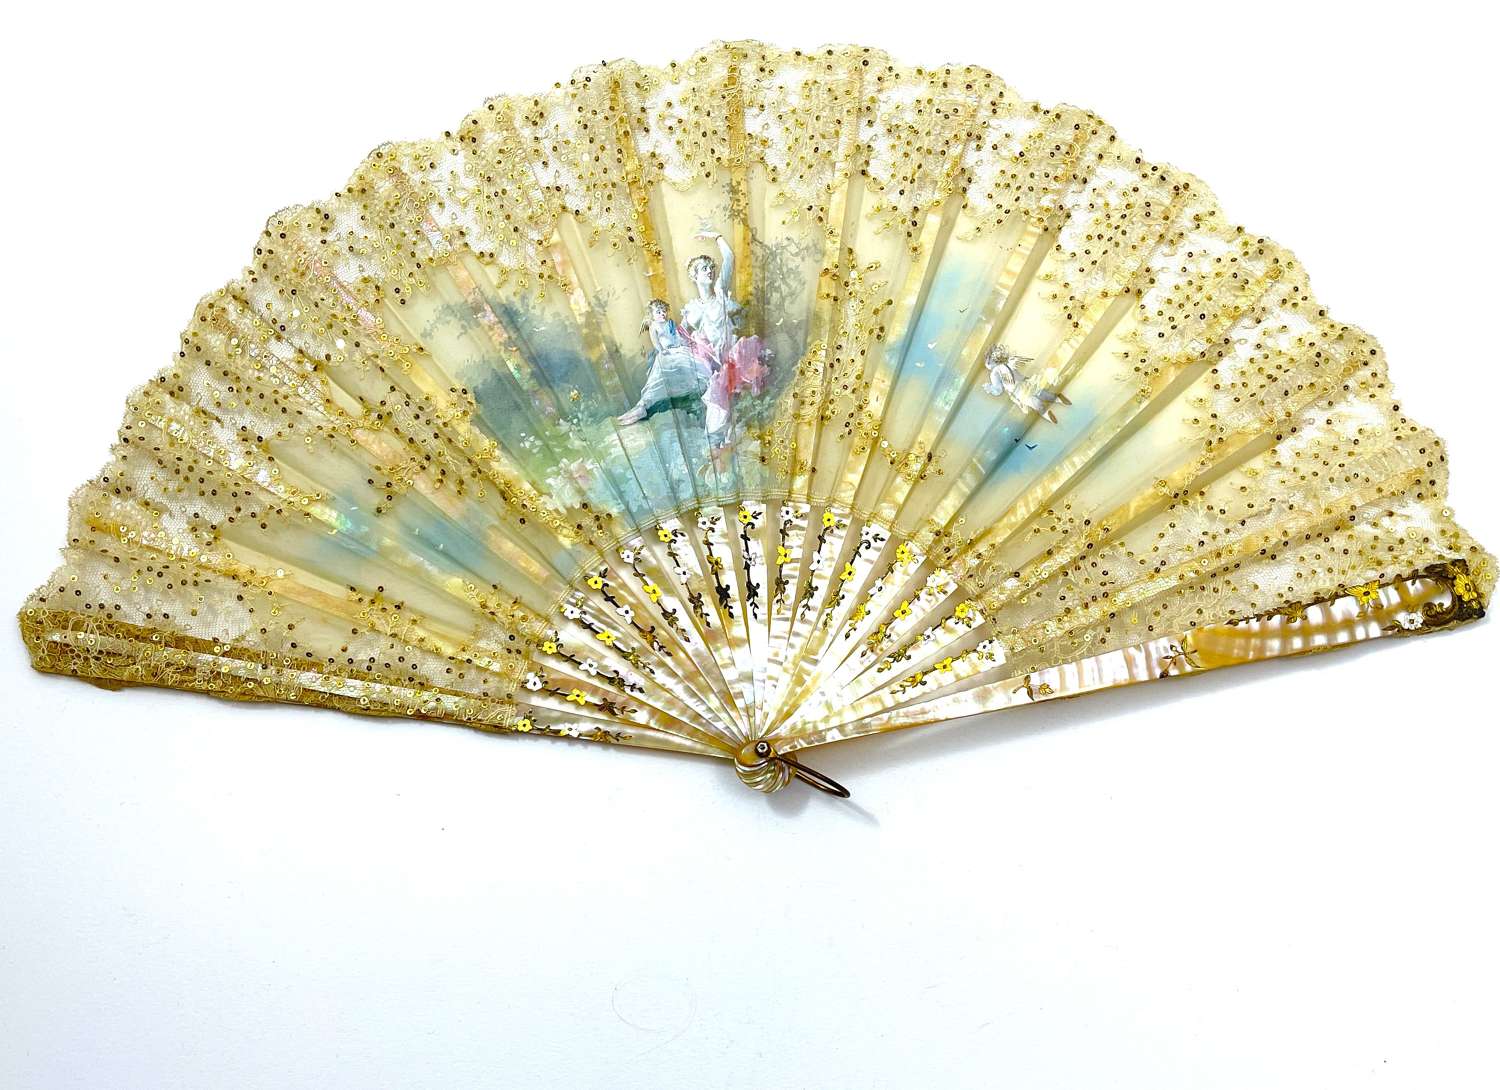 A Fine Antique French Hand Painted and Lace Fan Decorated with Sequins